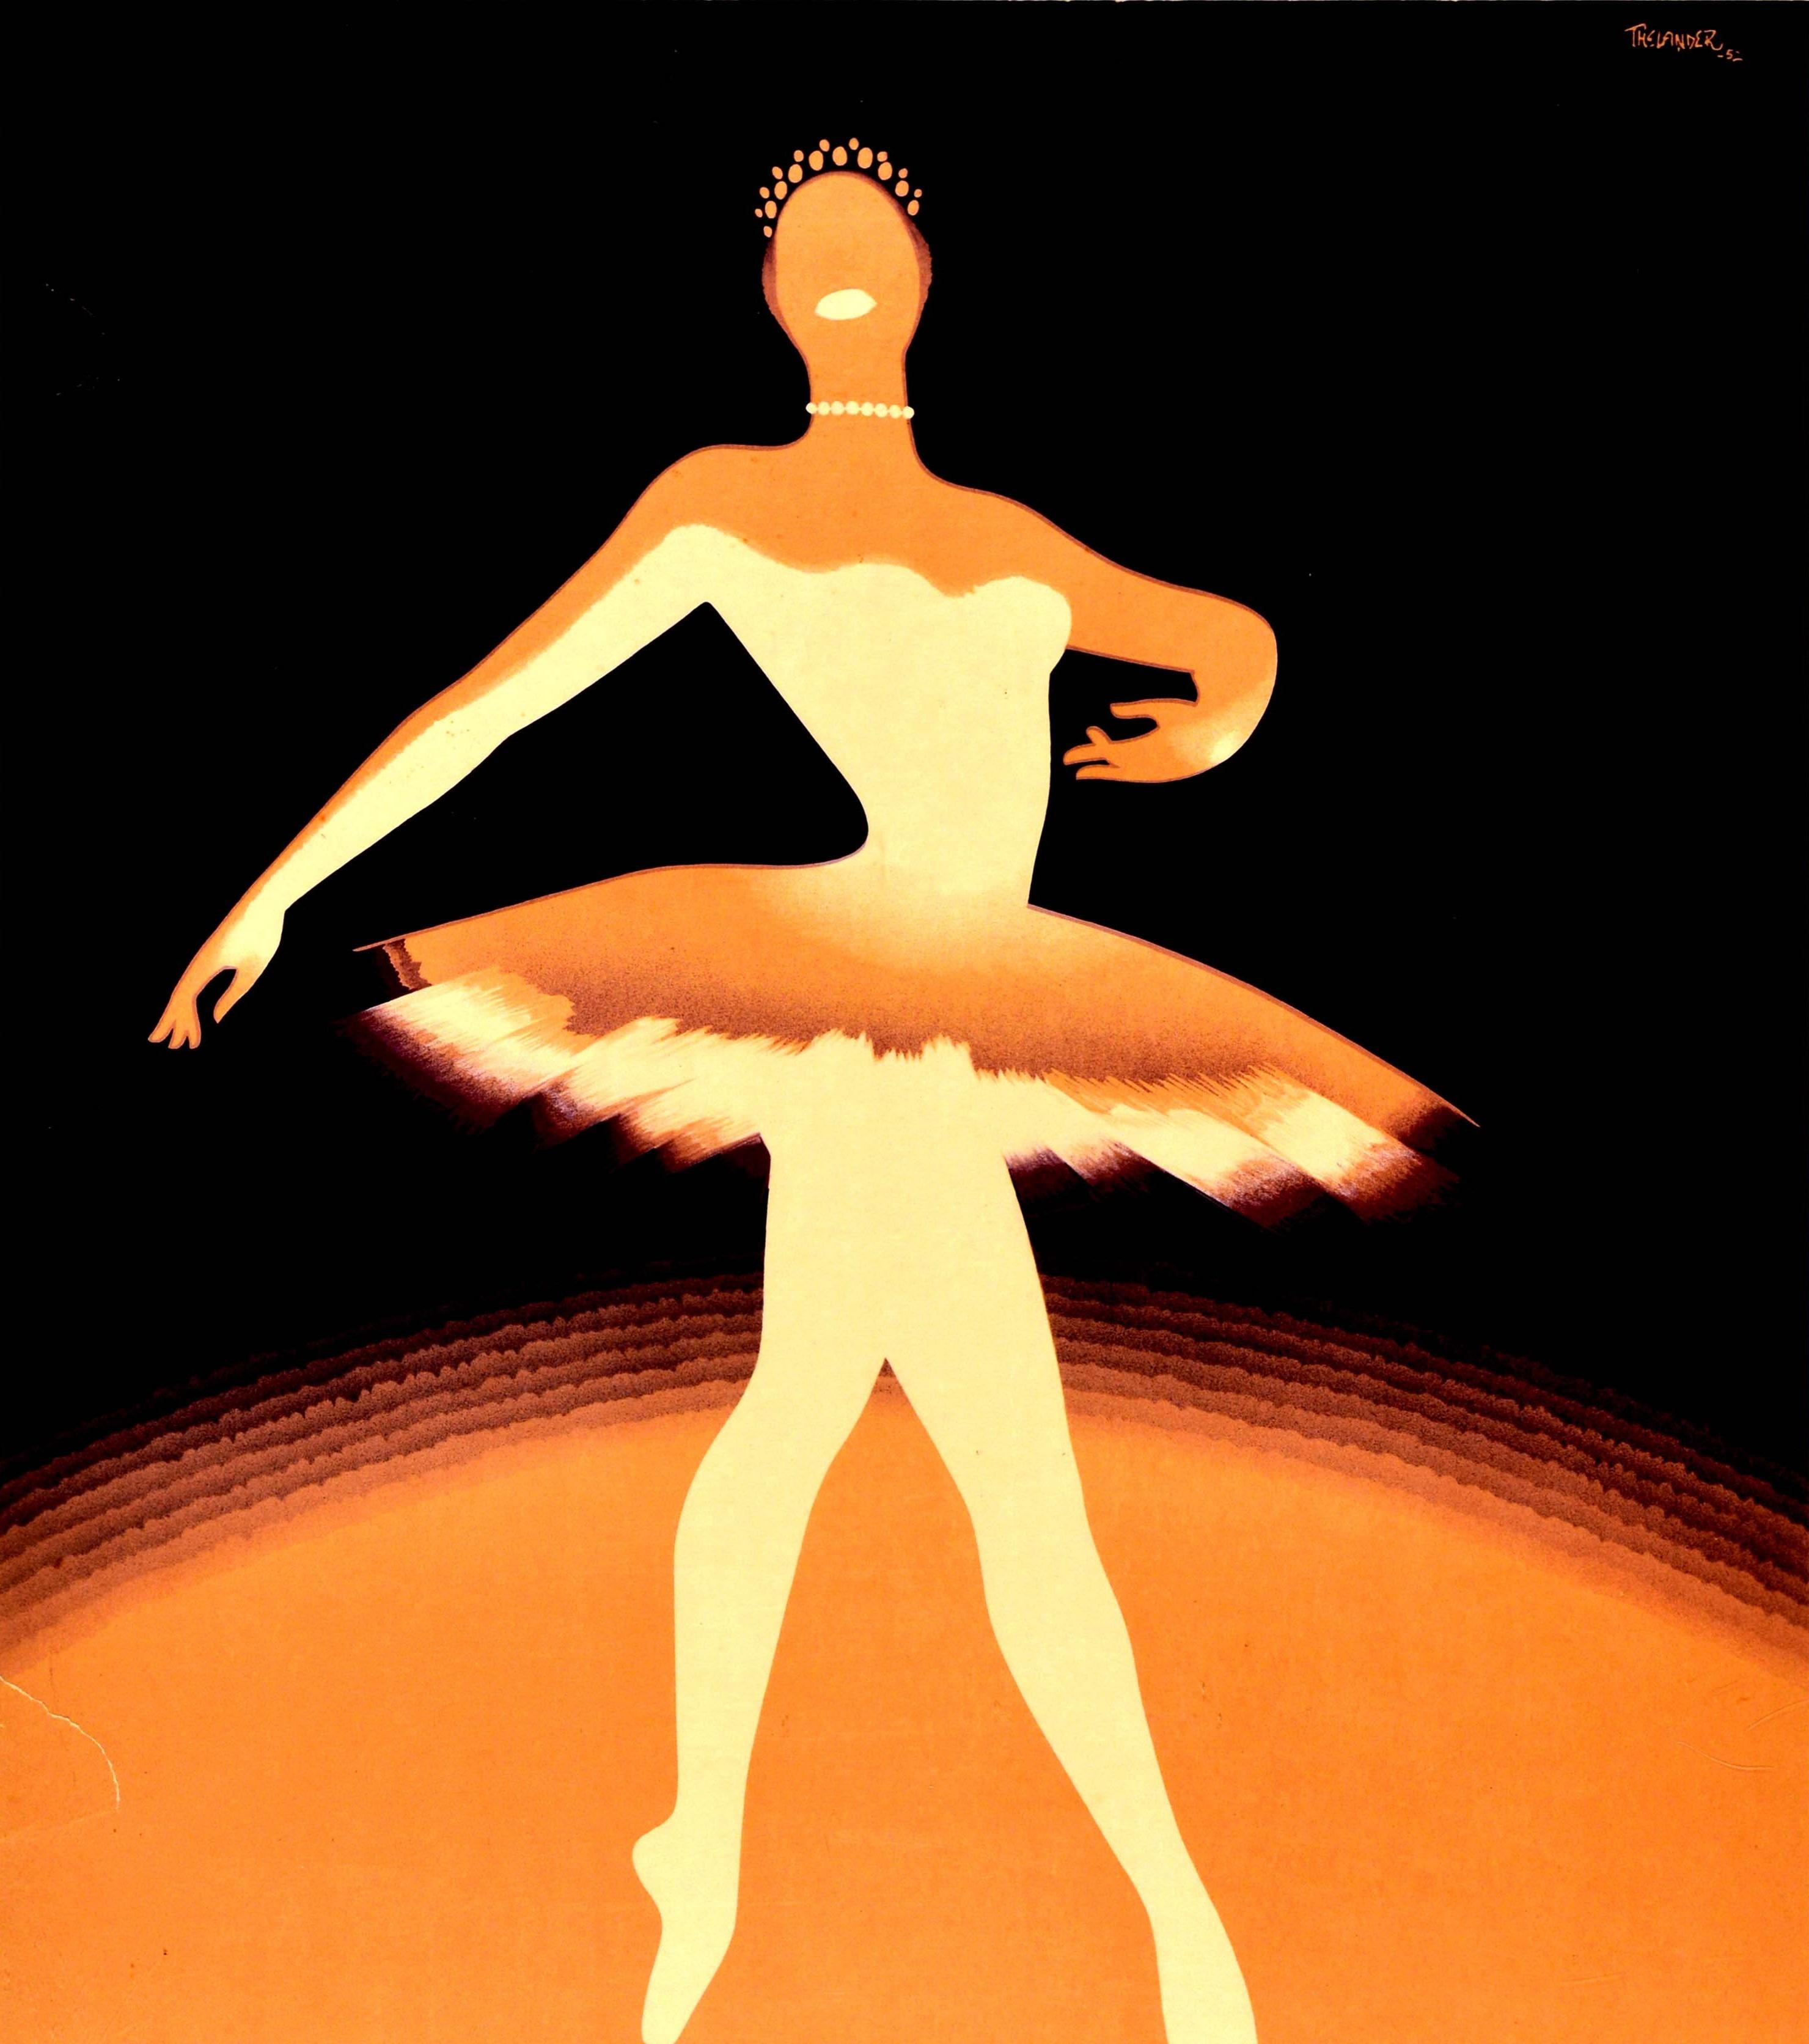 Original vintage advertising poster for the Grand Festival Ballets et Musique Danemark Copenhague / Festival of Ballet and Music Denmark held in Copenhagen on 19-31 May featuring a great illustration by Henry Thelander (1902-1986) of a smiling